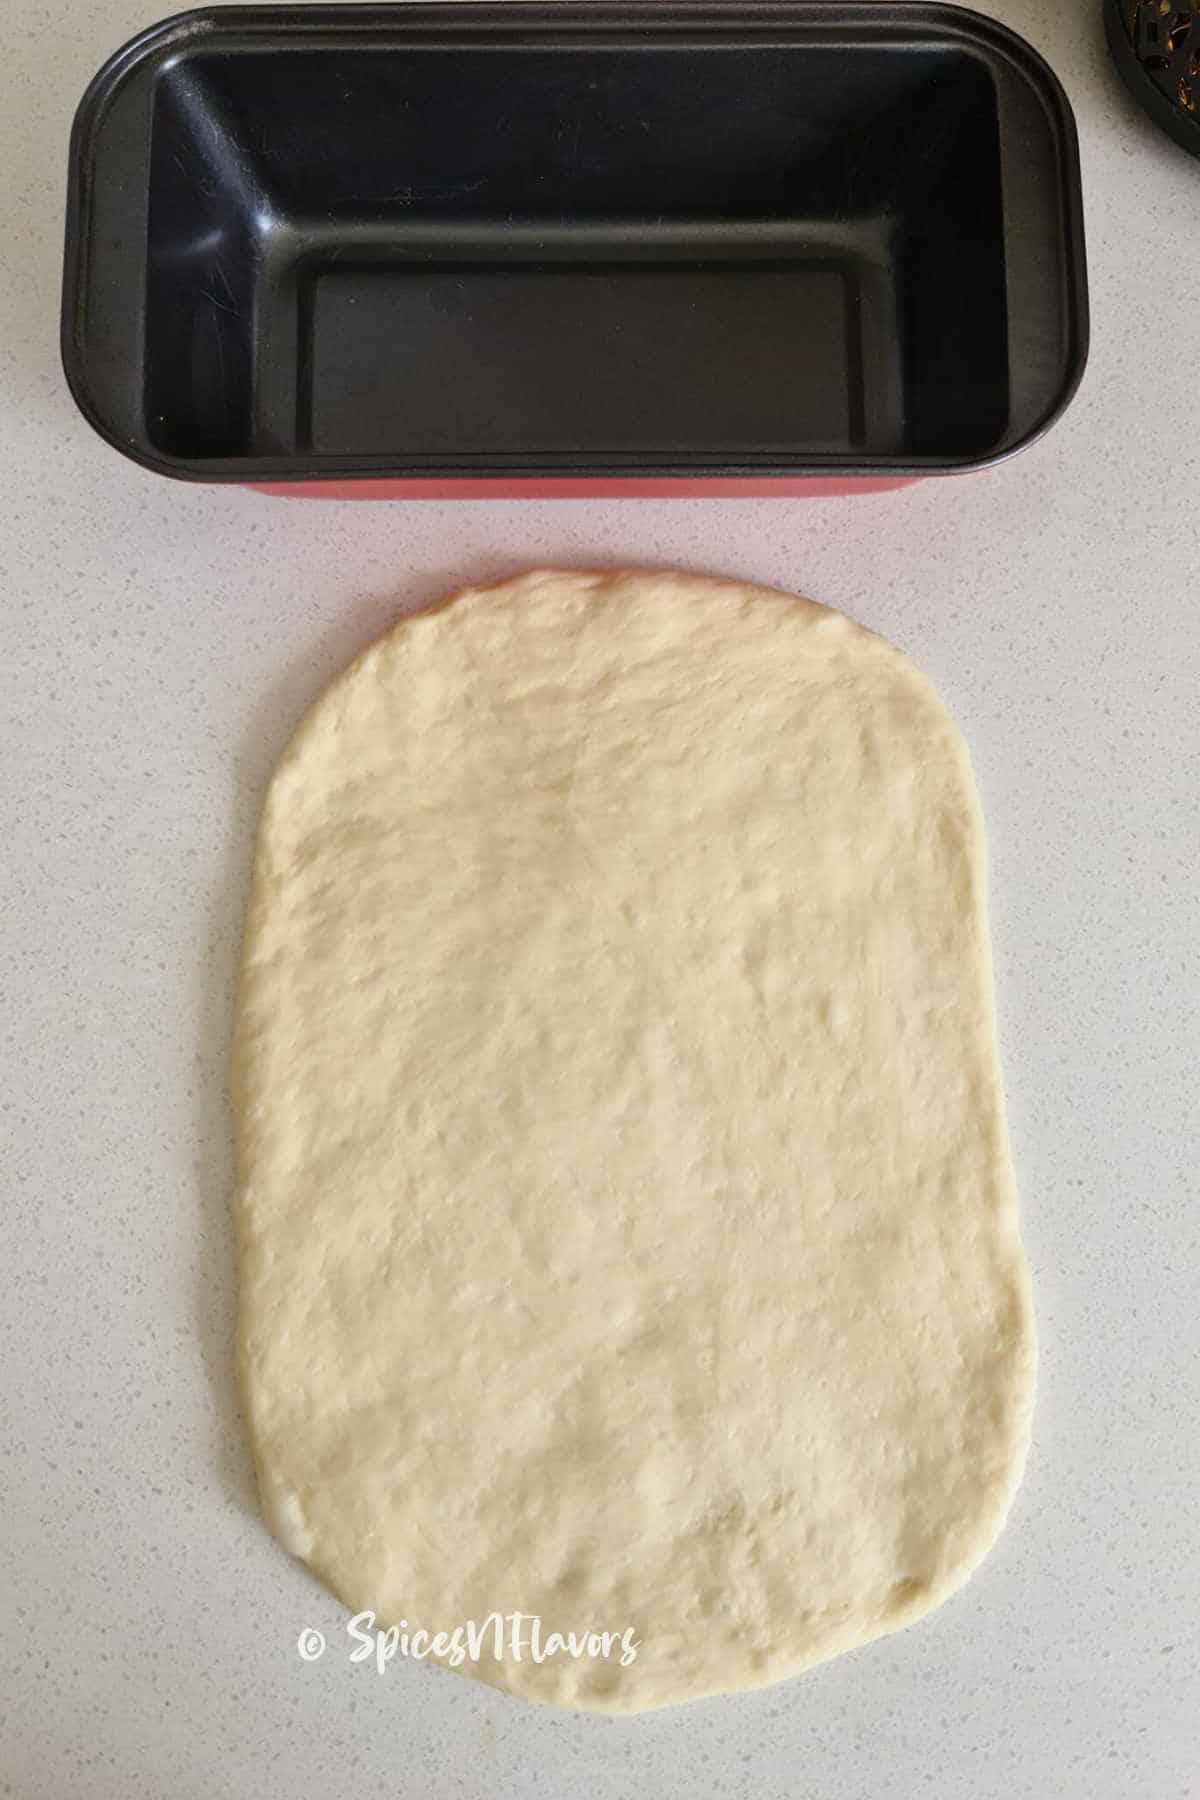 Roll the dough to fit your loaf pan